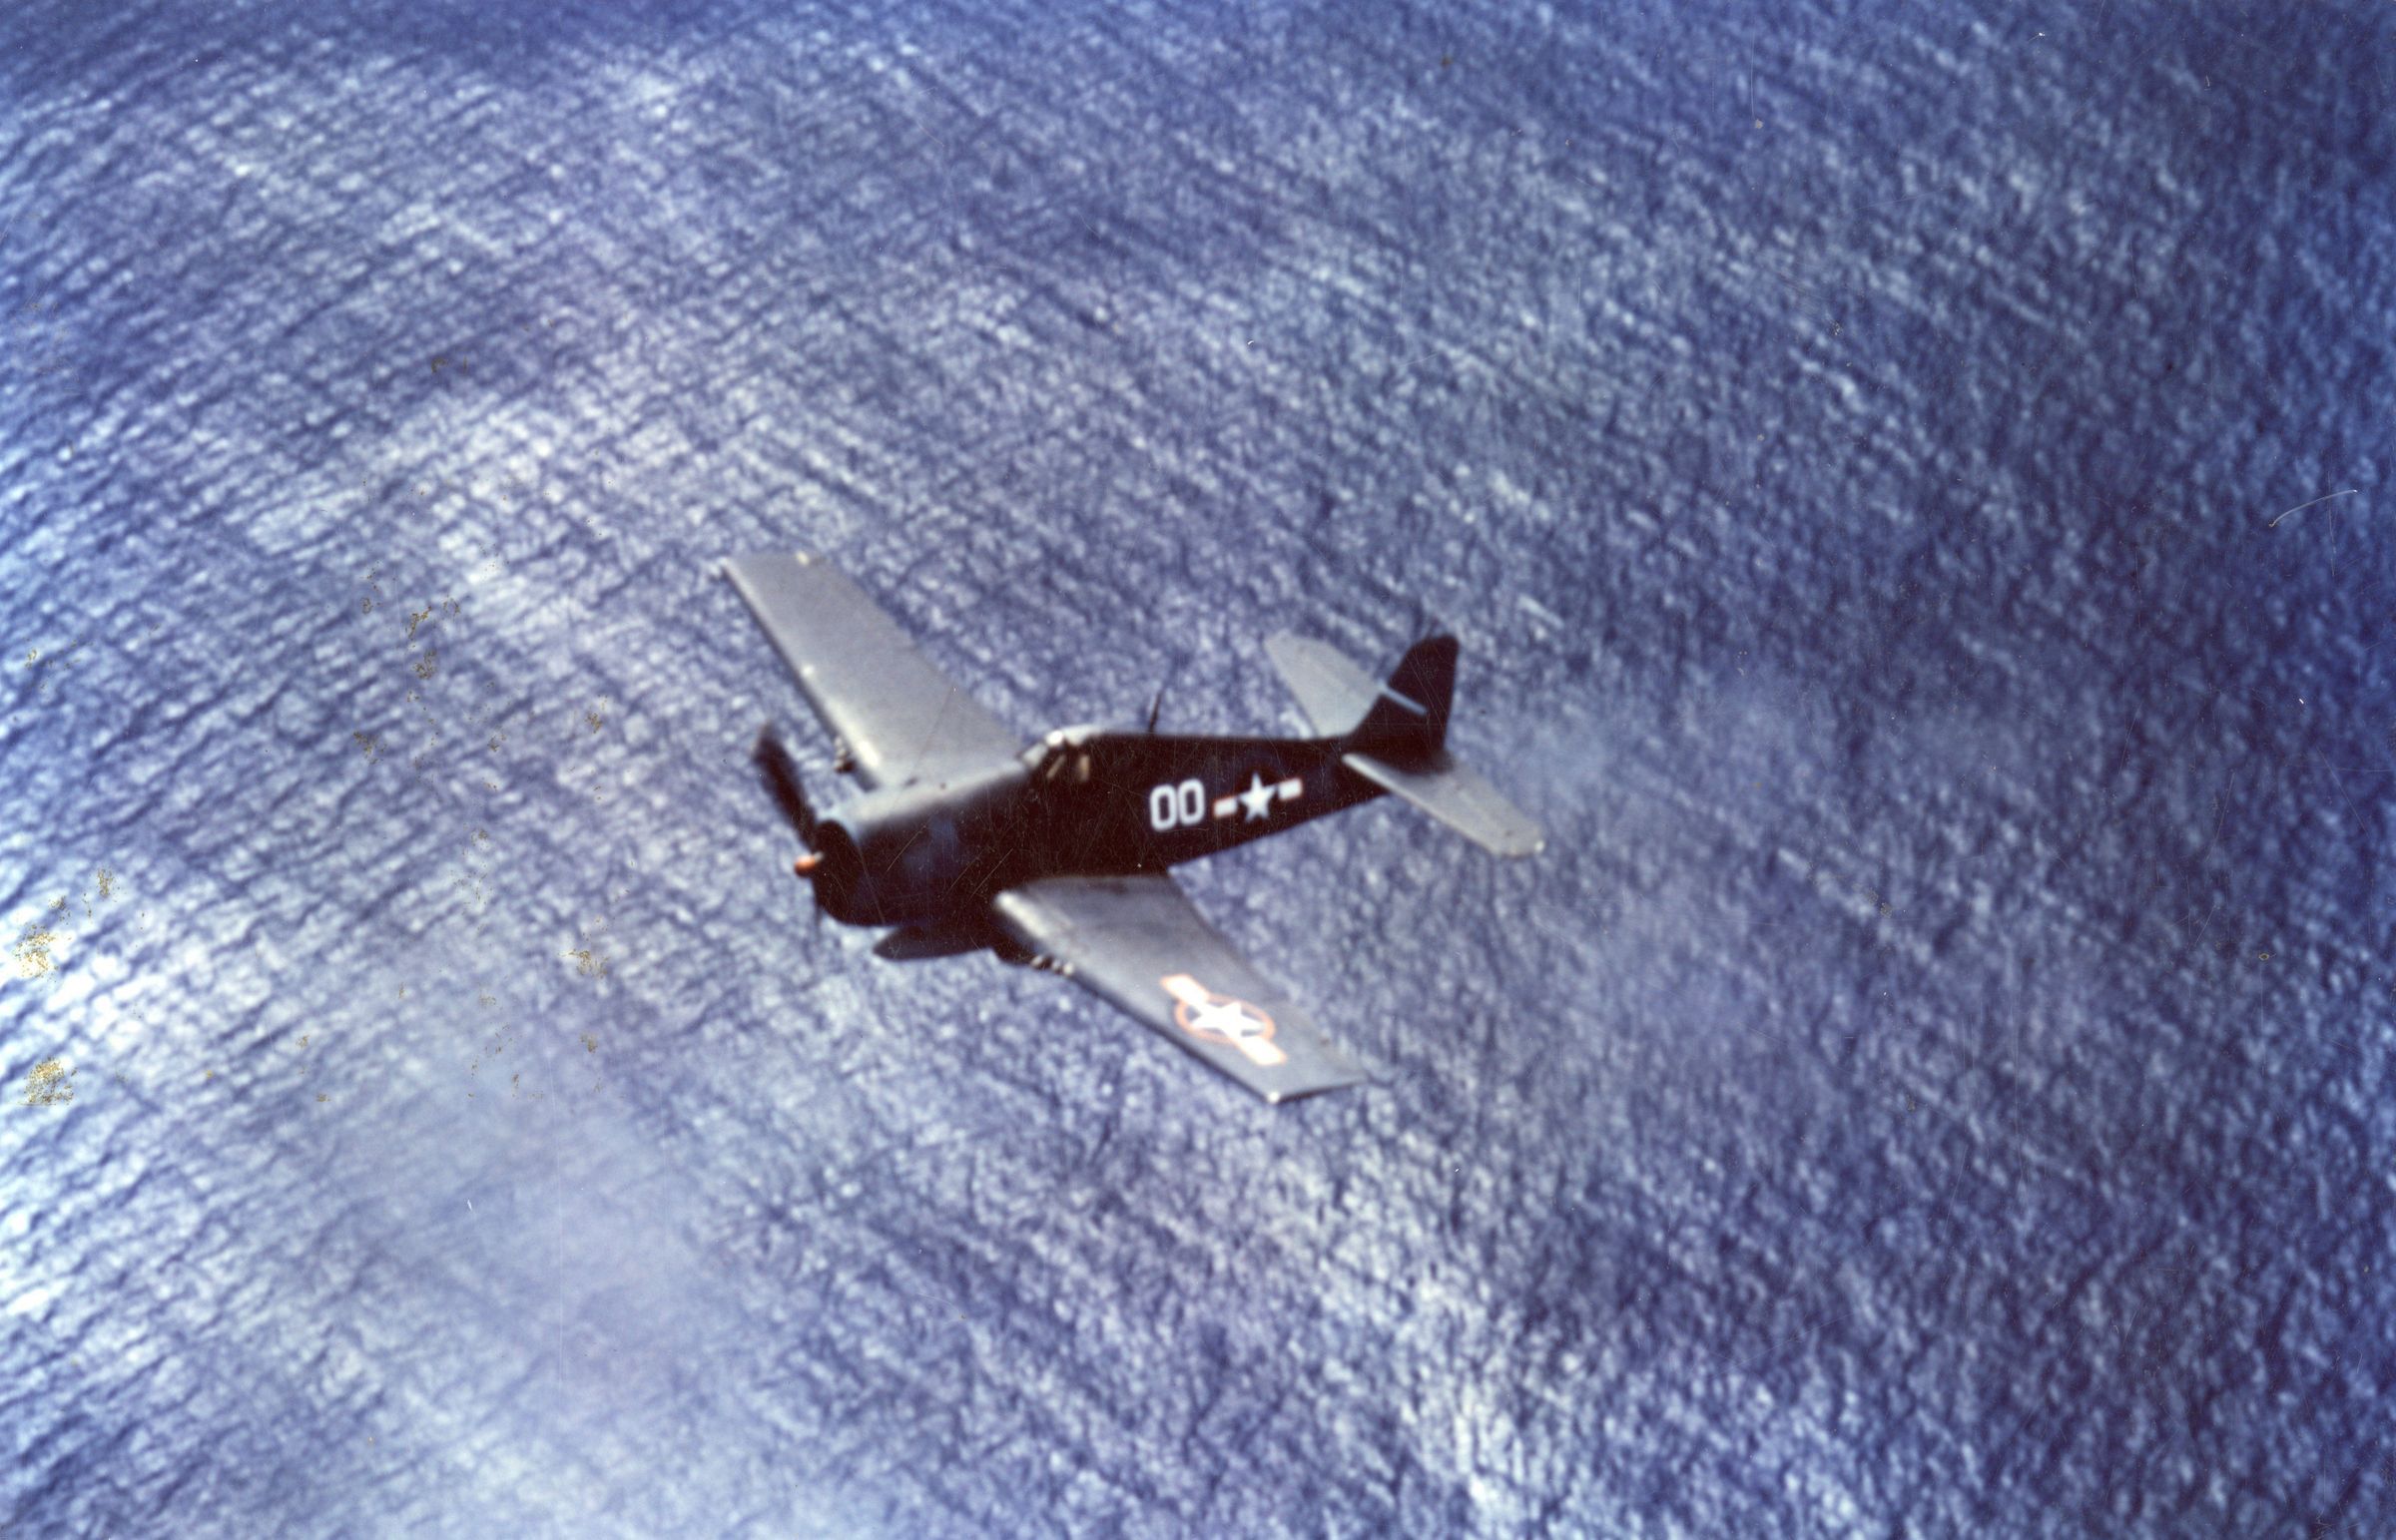 Primary Image of James H. Flatley Flying his F6F Hellcat